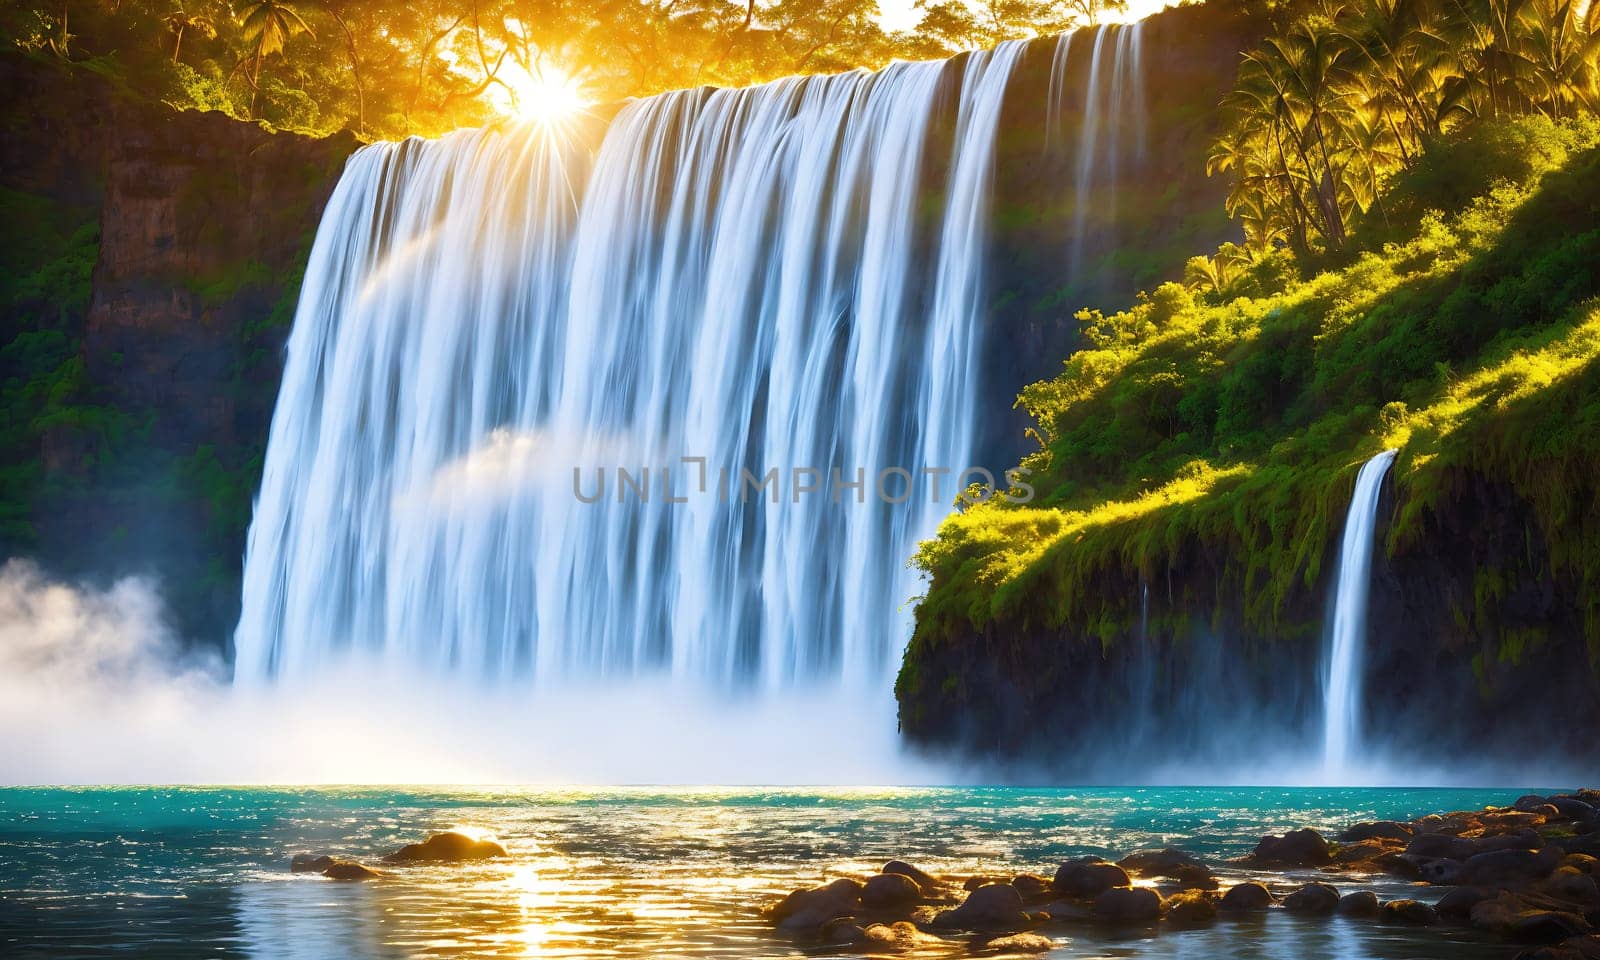 The image shows a beautiful waterfall in the middle of a lush forest, surrounded by green trees and a blue sky.